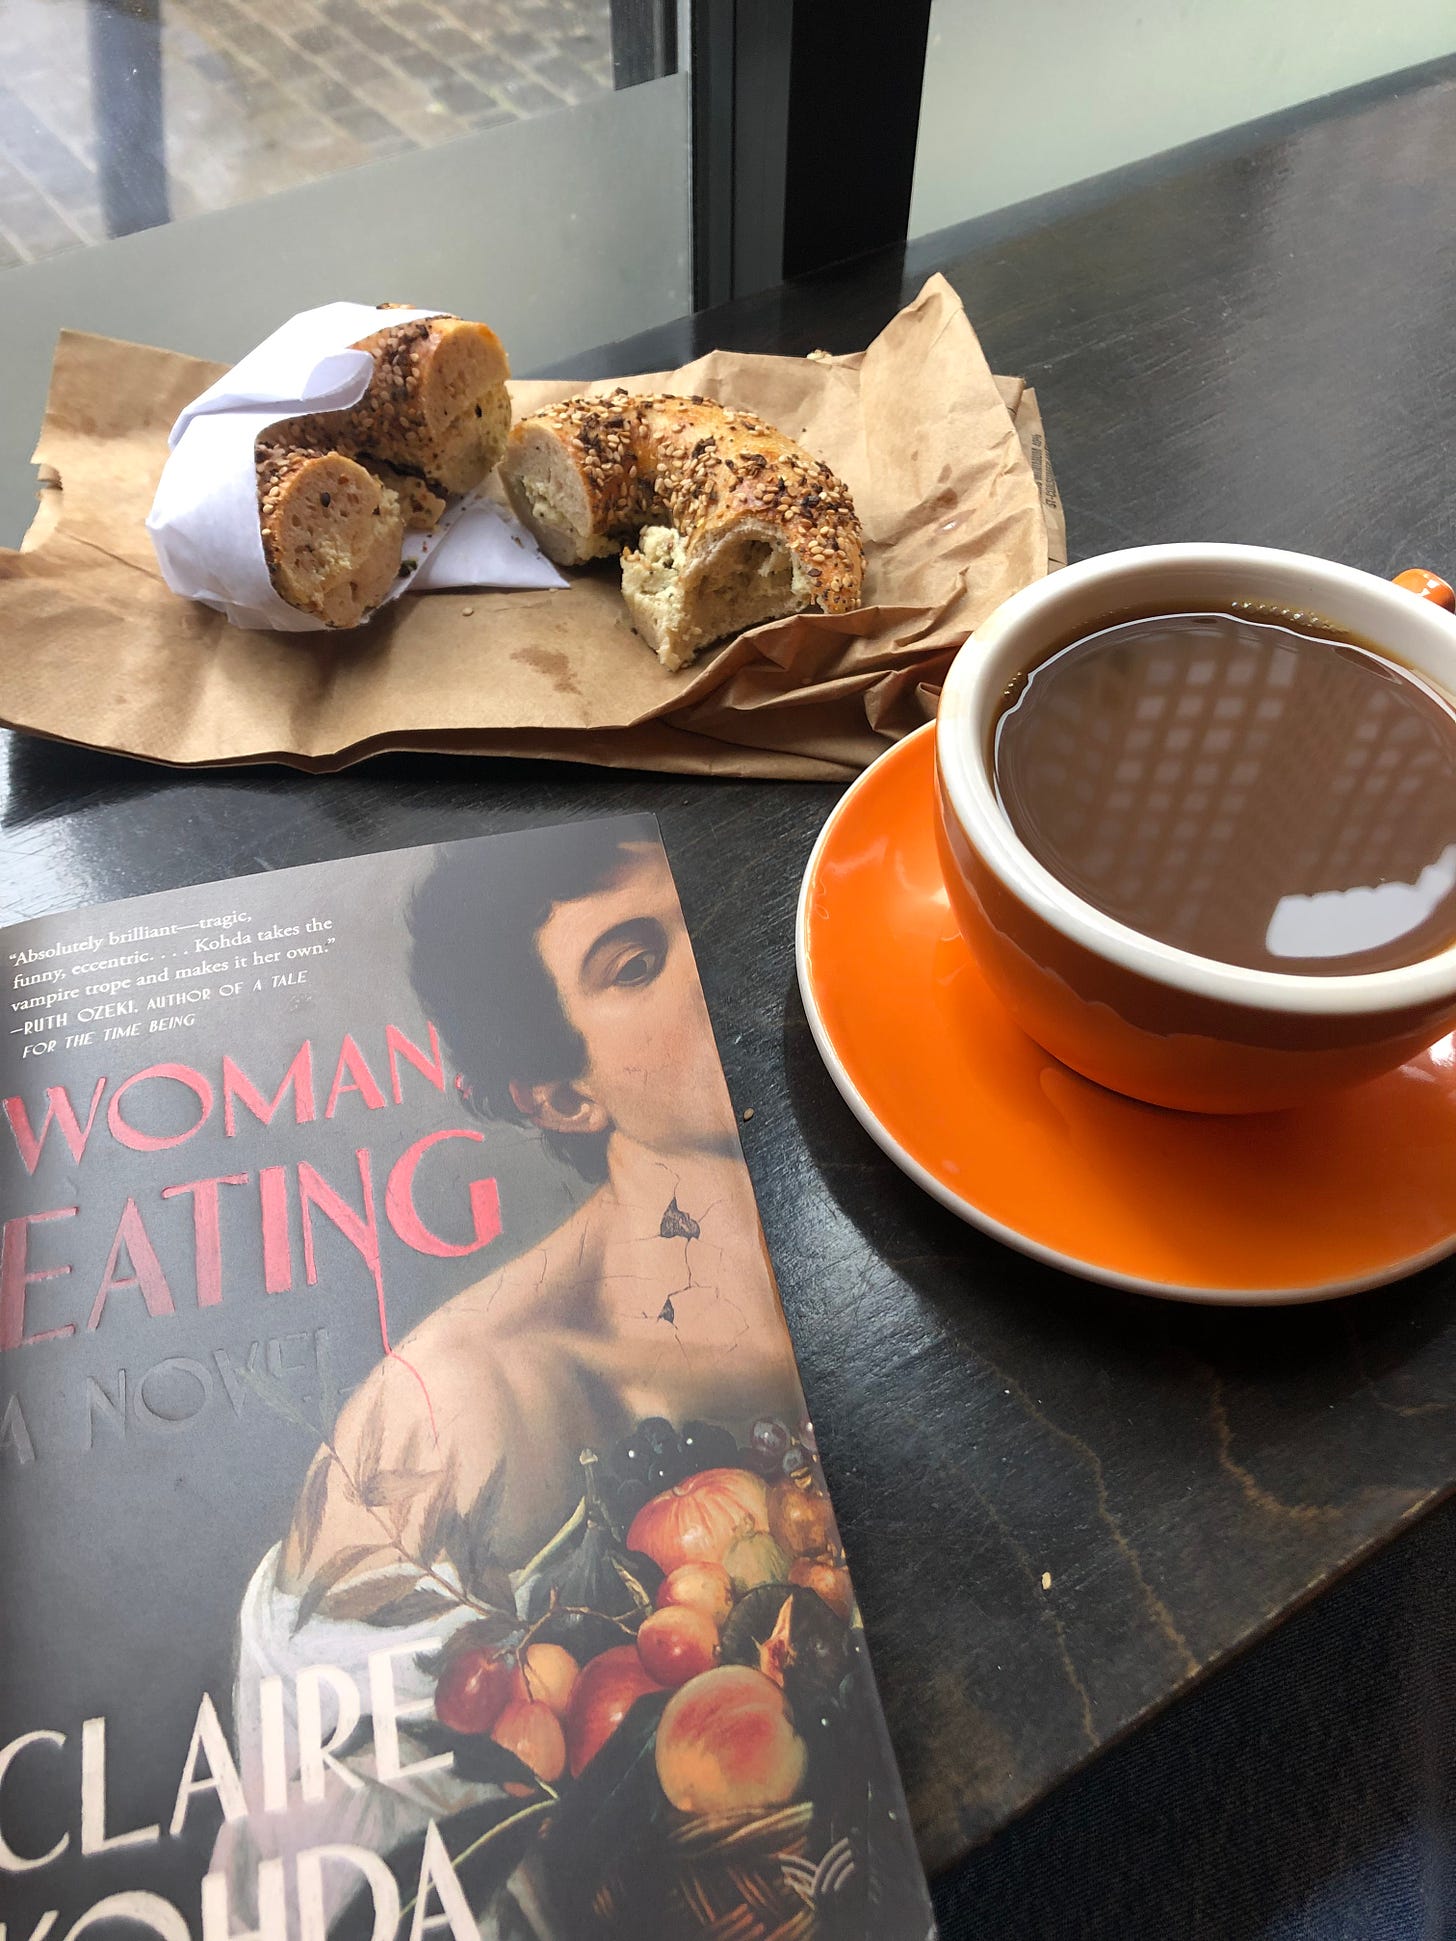 An image from a Boston cafe. An orange mug and saucer filled with coffee is on the right hand side of the image. In the top left corner there is a bagel and the bottom left sits a book called "Woman Eating"